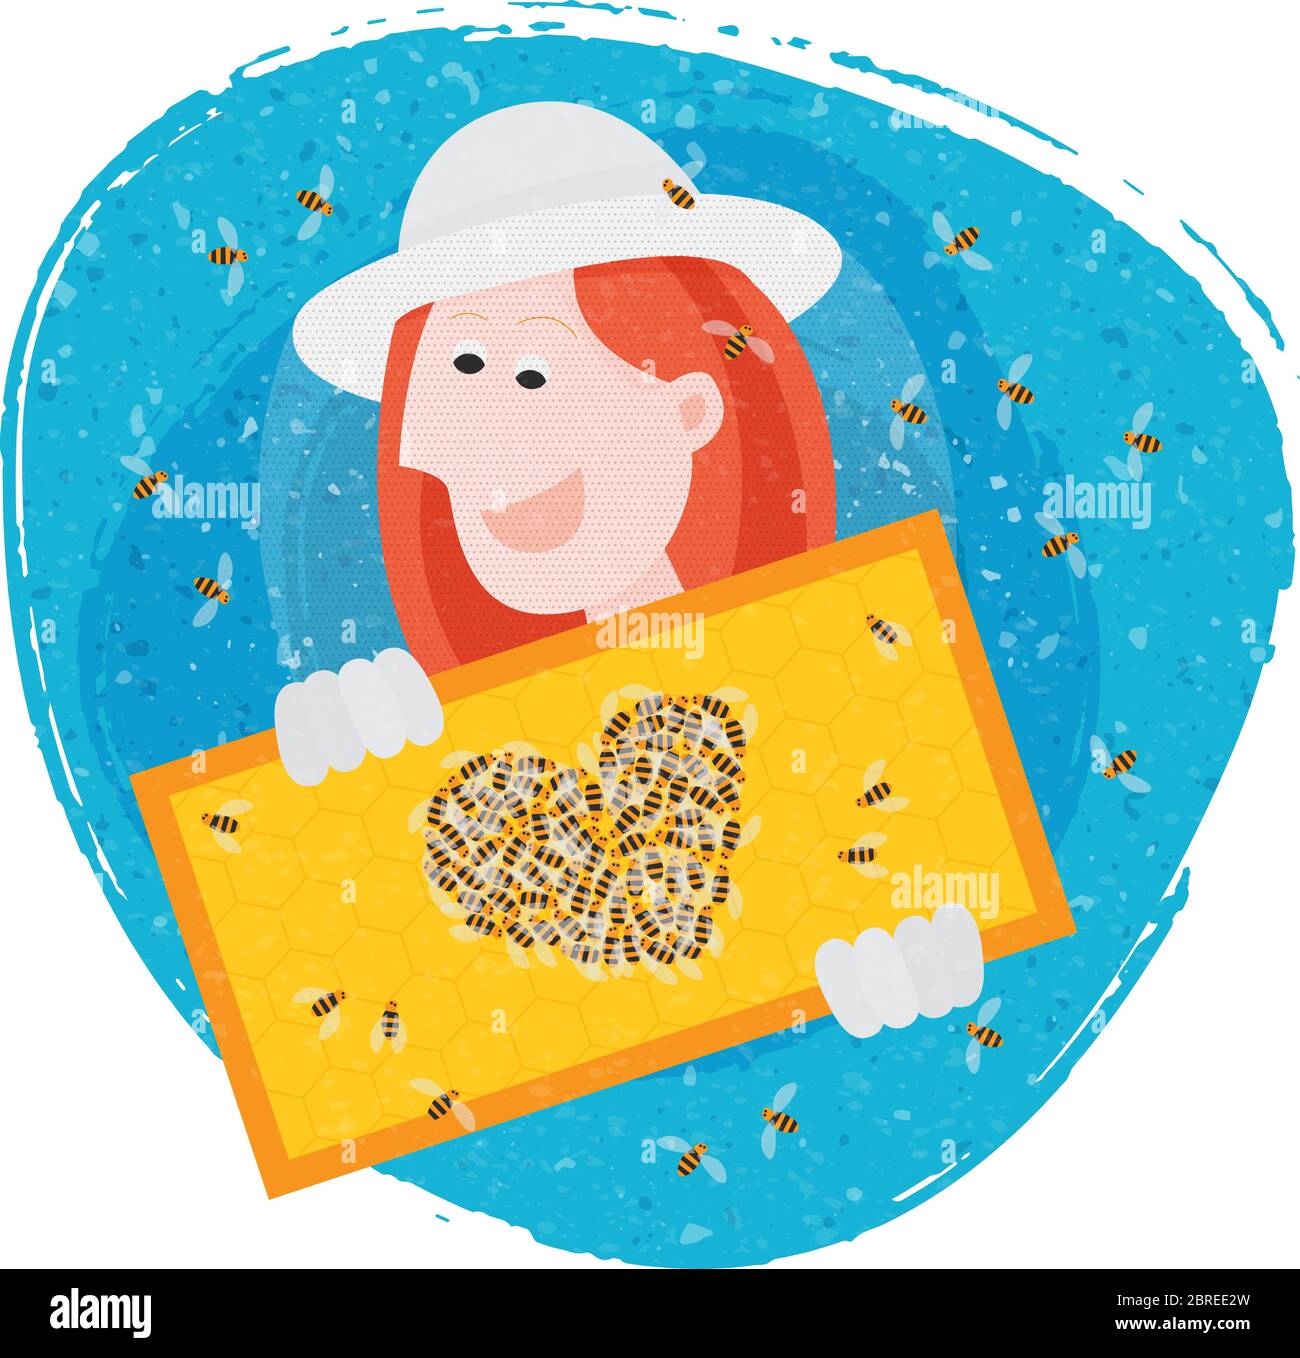 Bees making heart. Woman with beekeeping hat and gloves, holding honeycomb. Stock Vector